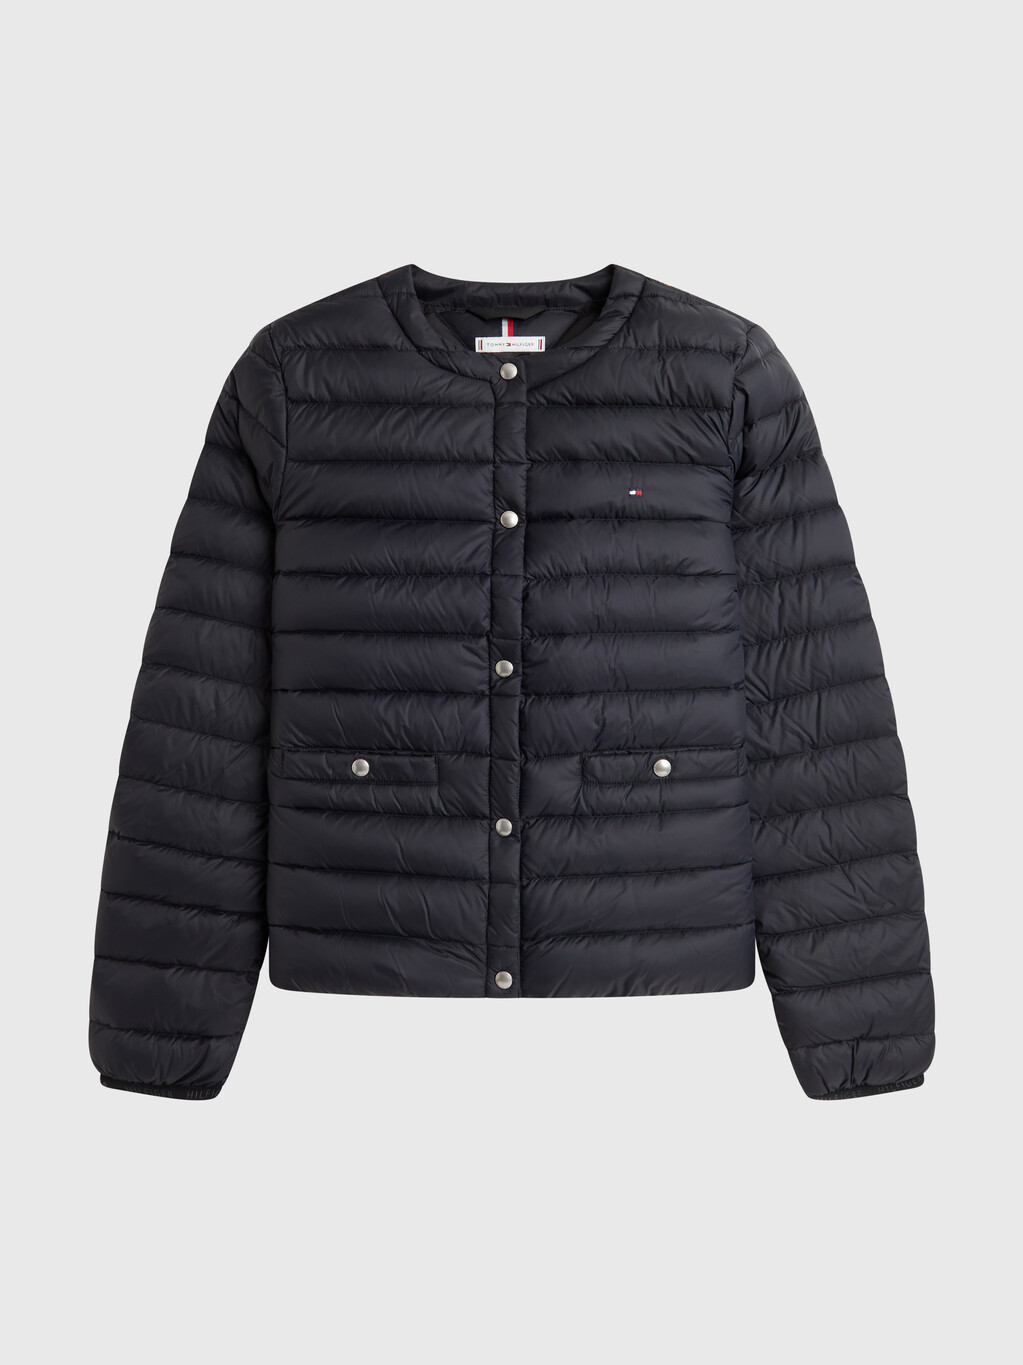 Lightweight Quilted Down Collarless Jacket, Black, hi-res